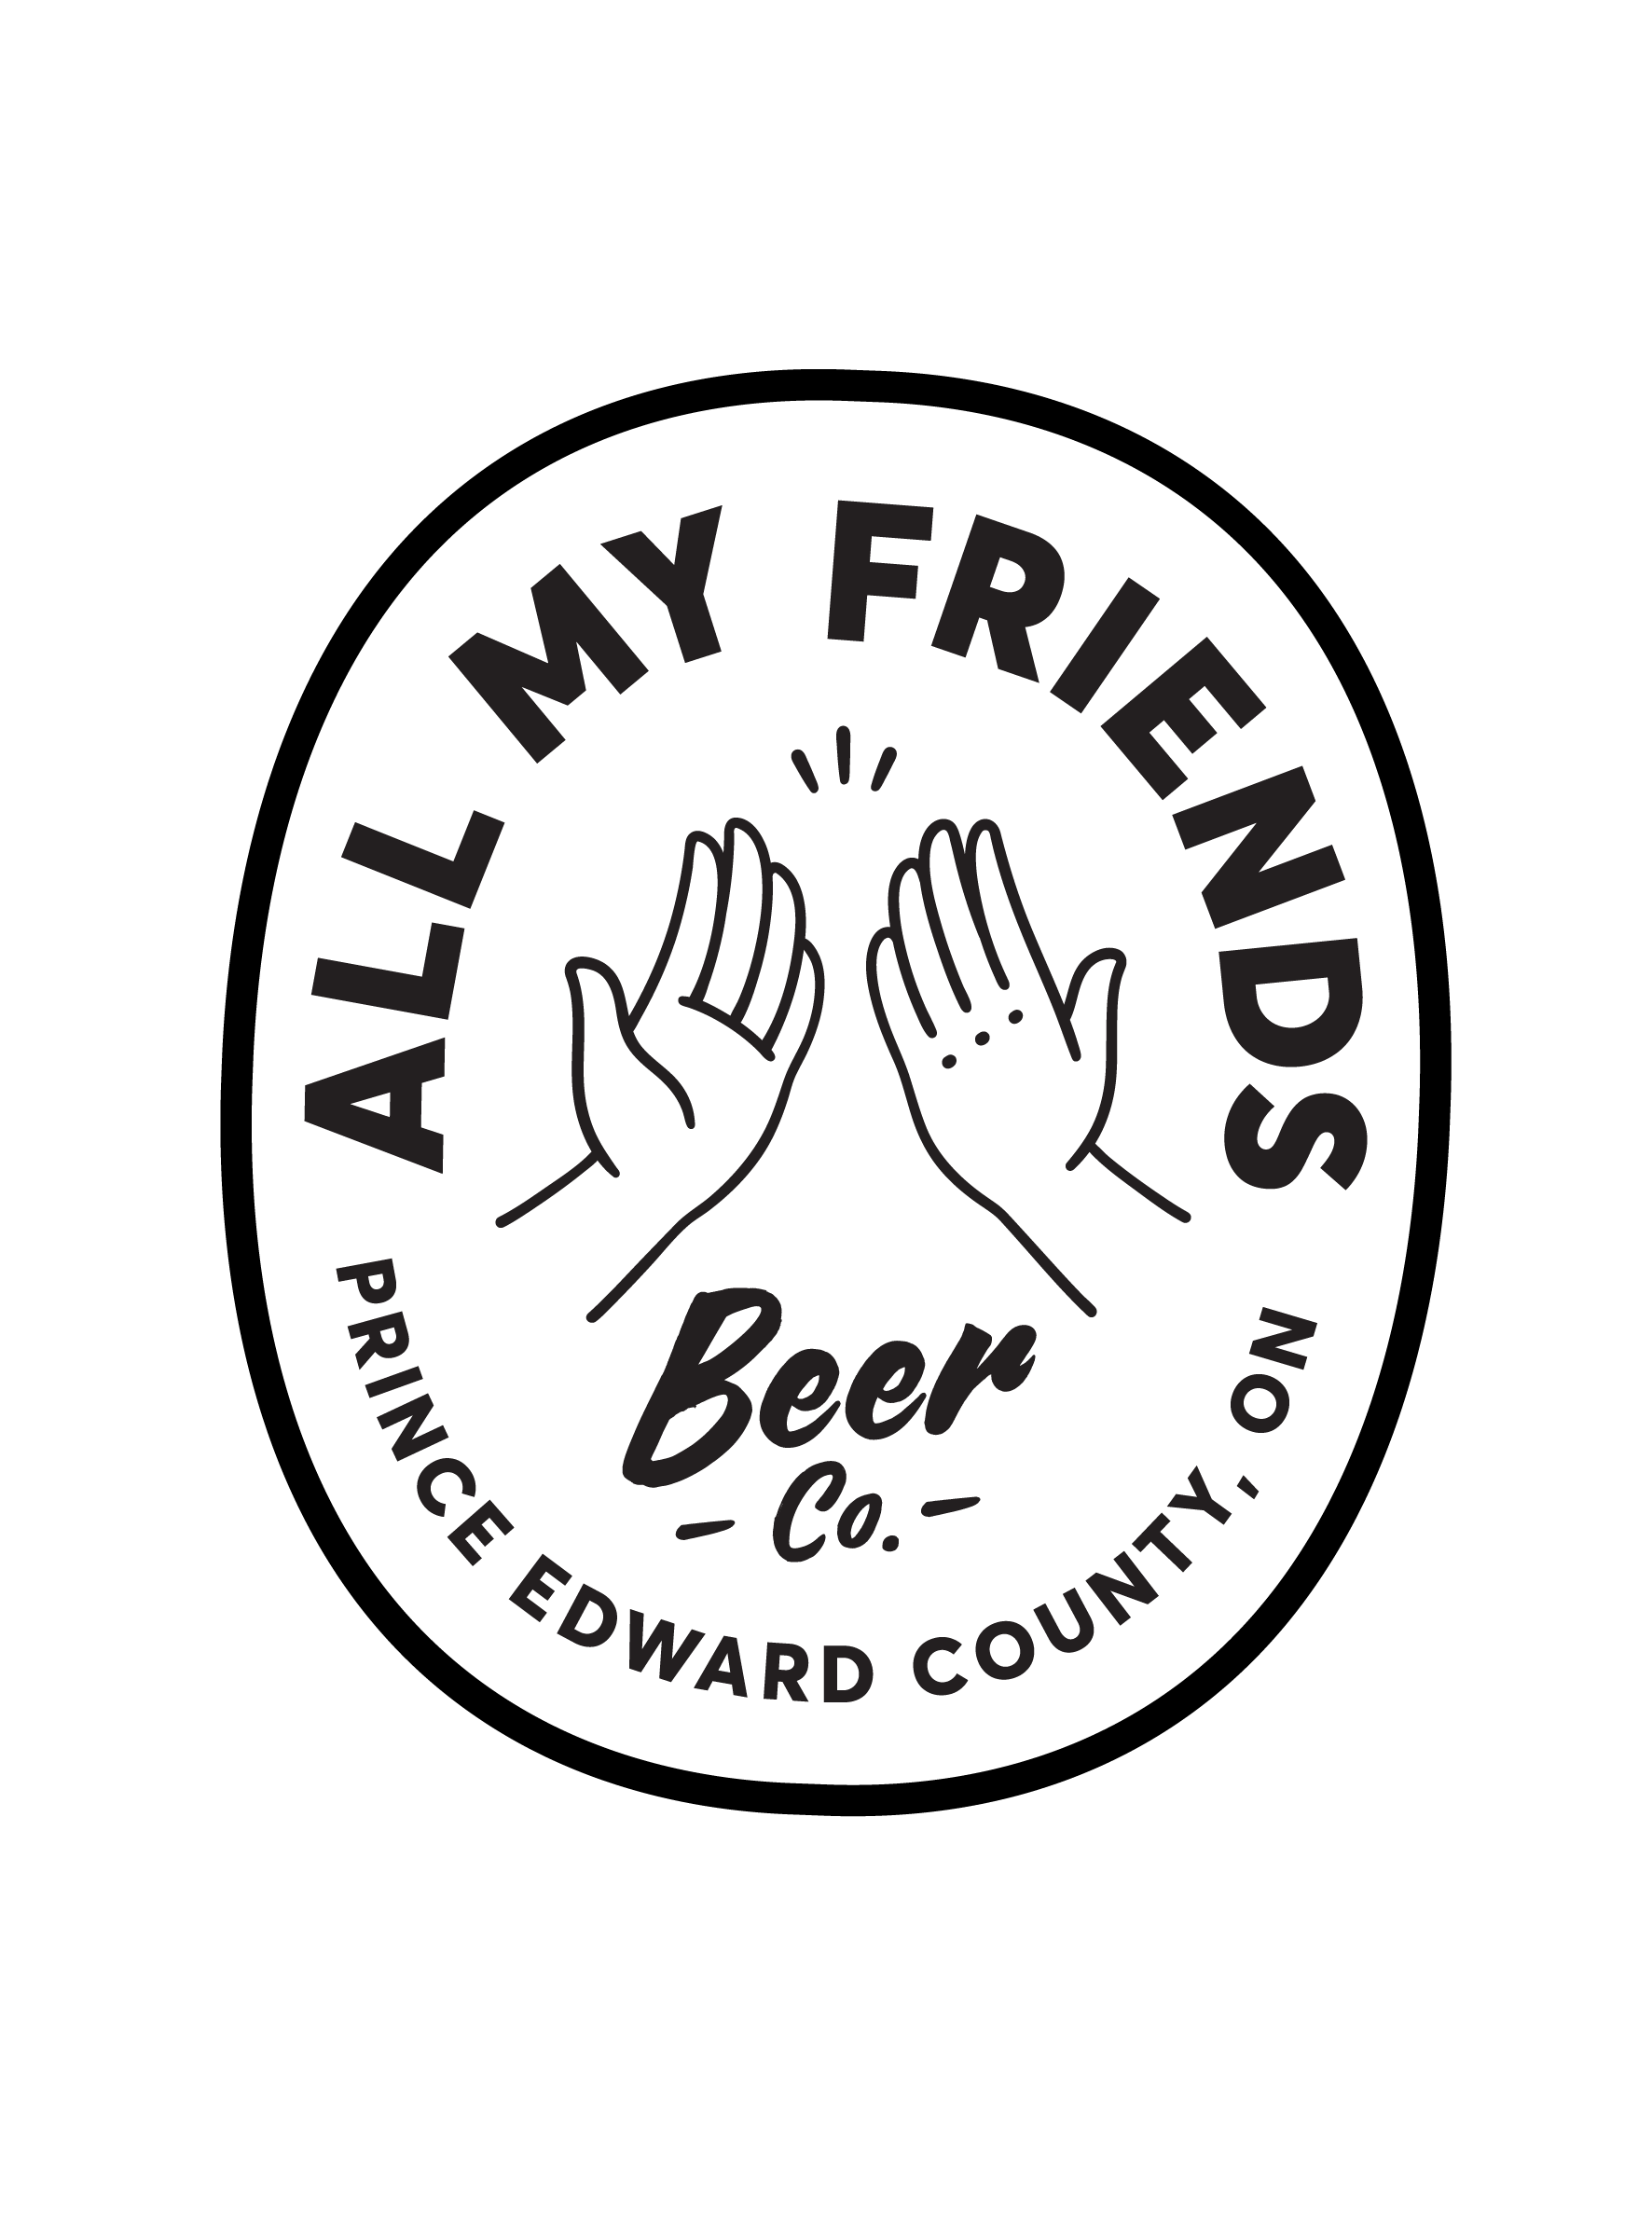 All My Friends Beer Co